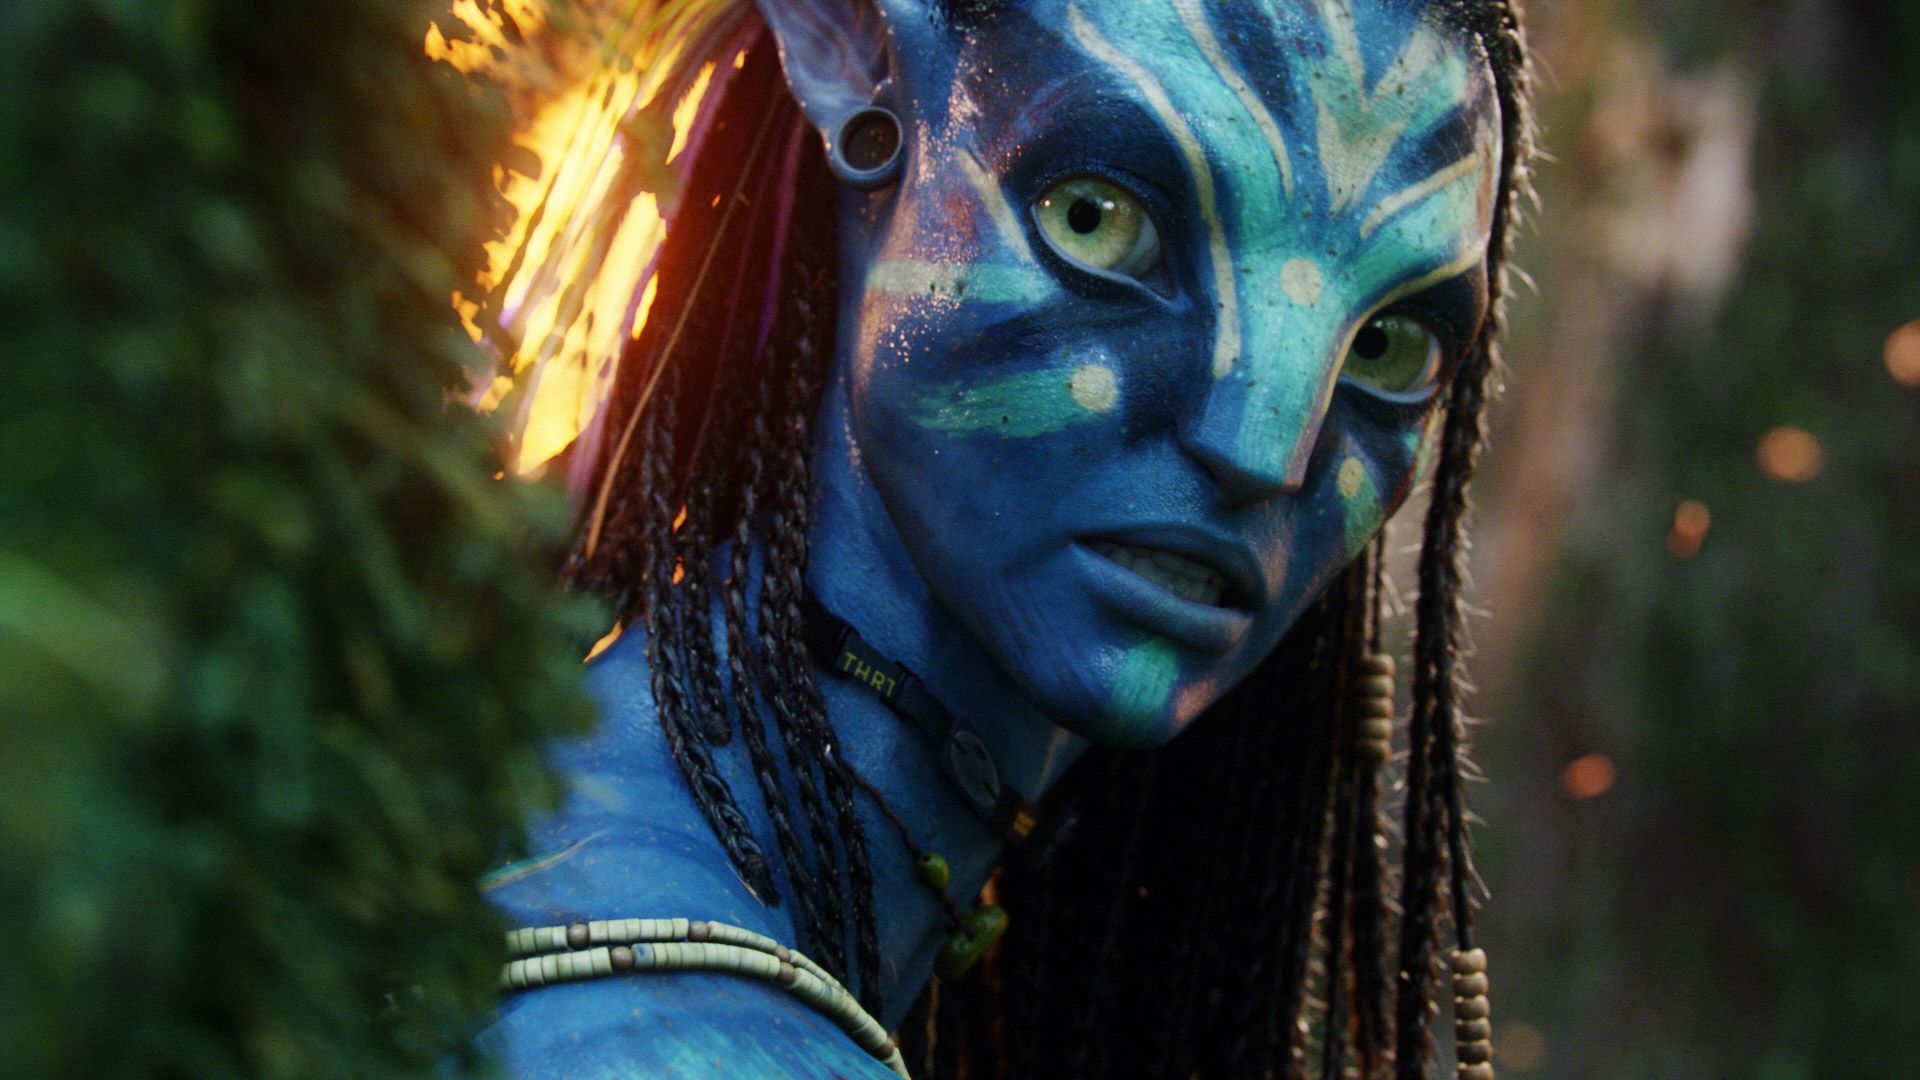 ‘Avatar’ Sequels Have Stopped Filming Due to Coronavirus Concerns